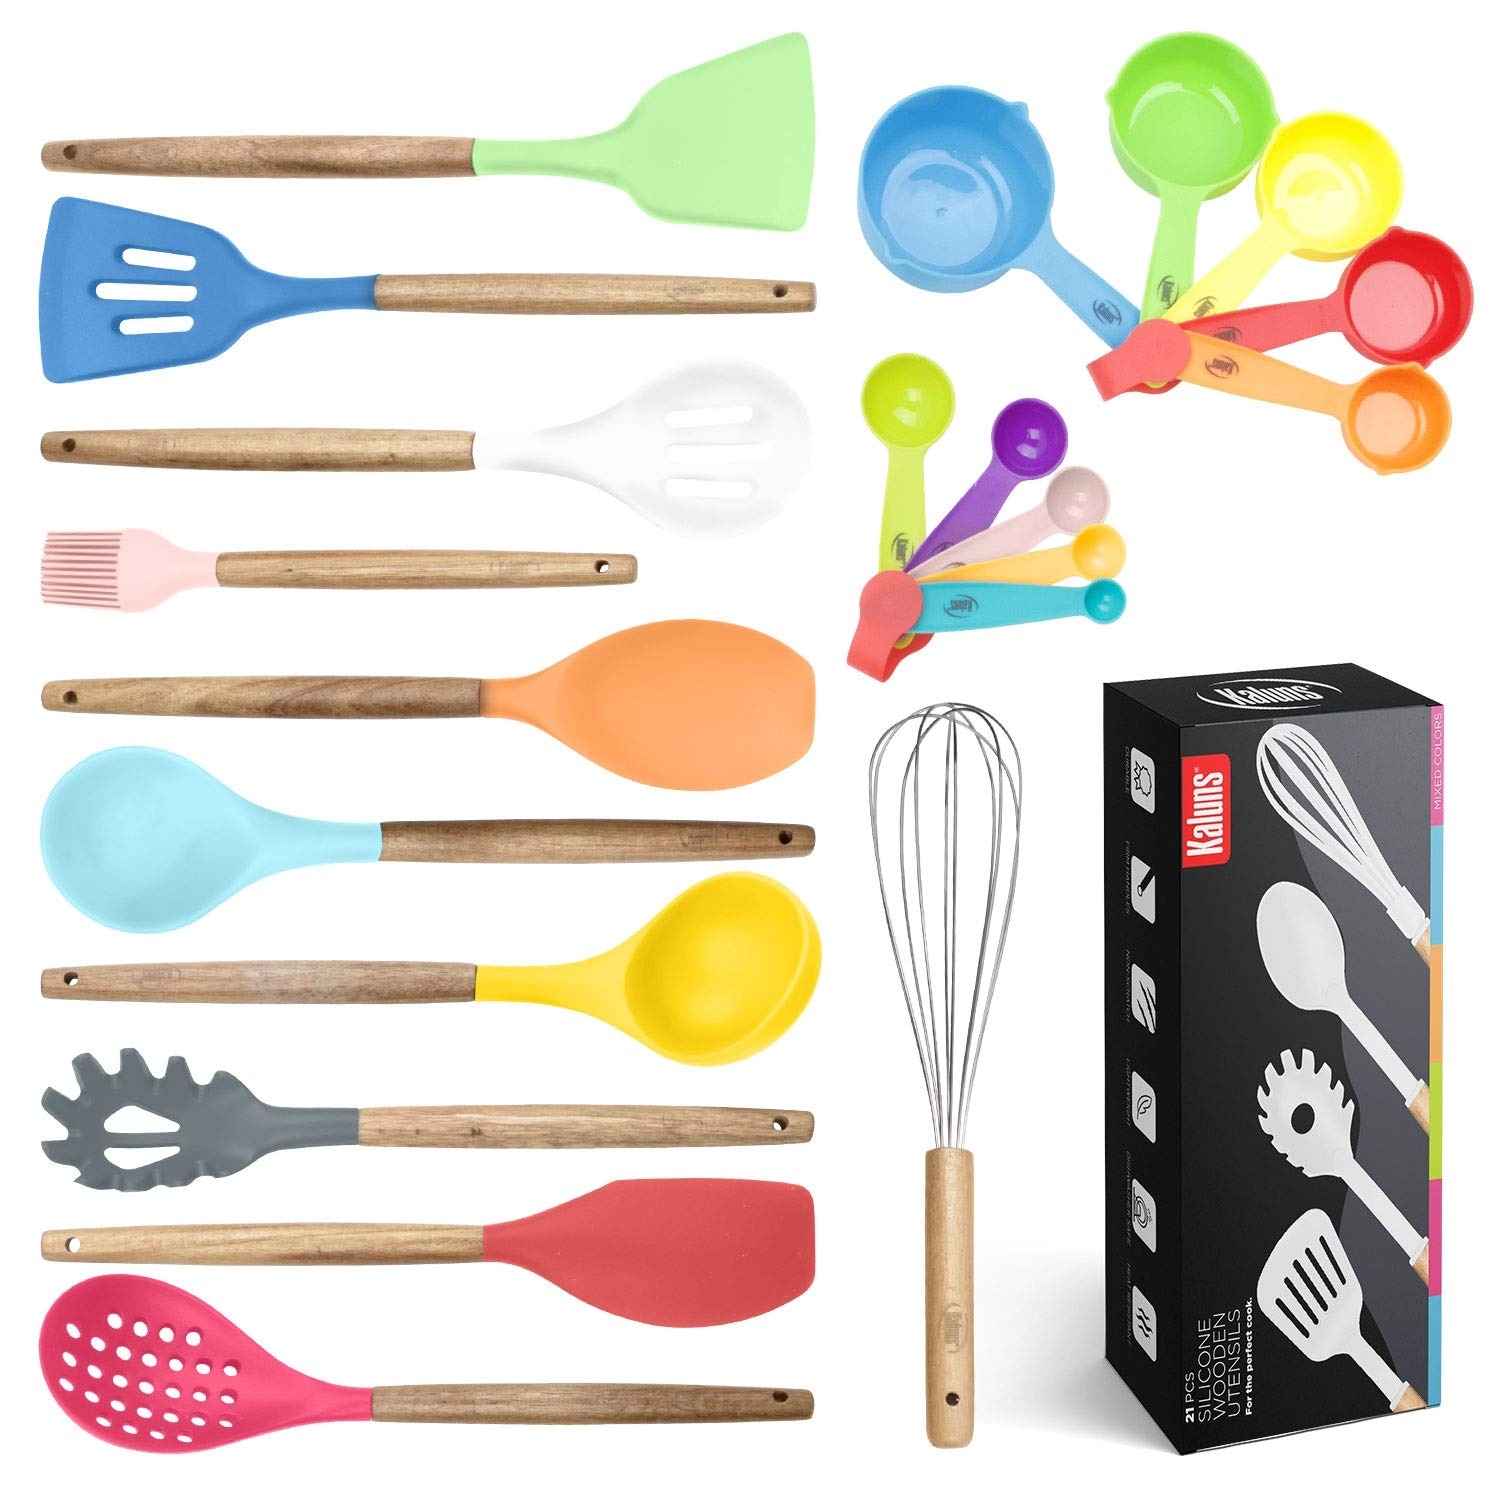 https://ak1.ostkcdn.com/images/products/is/images/direct/a37d9f52a40b3358c64366adb9ff65b78d6977be/Kitchen-Utensils-Set%2C-21-Wood-and-Silicone-Cooking-Utensil-Set.jpg